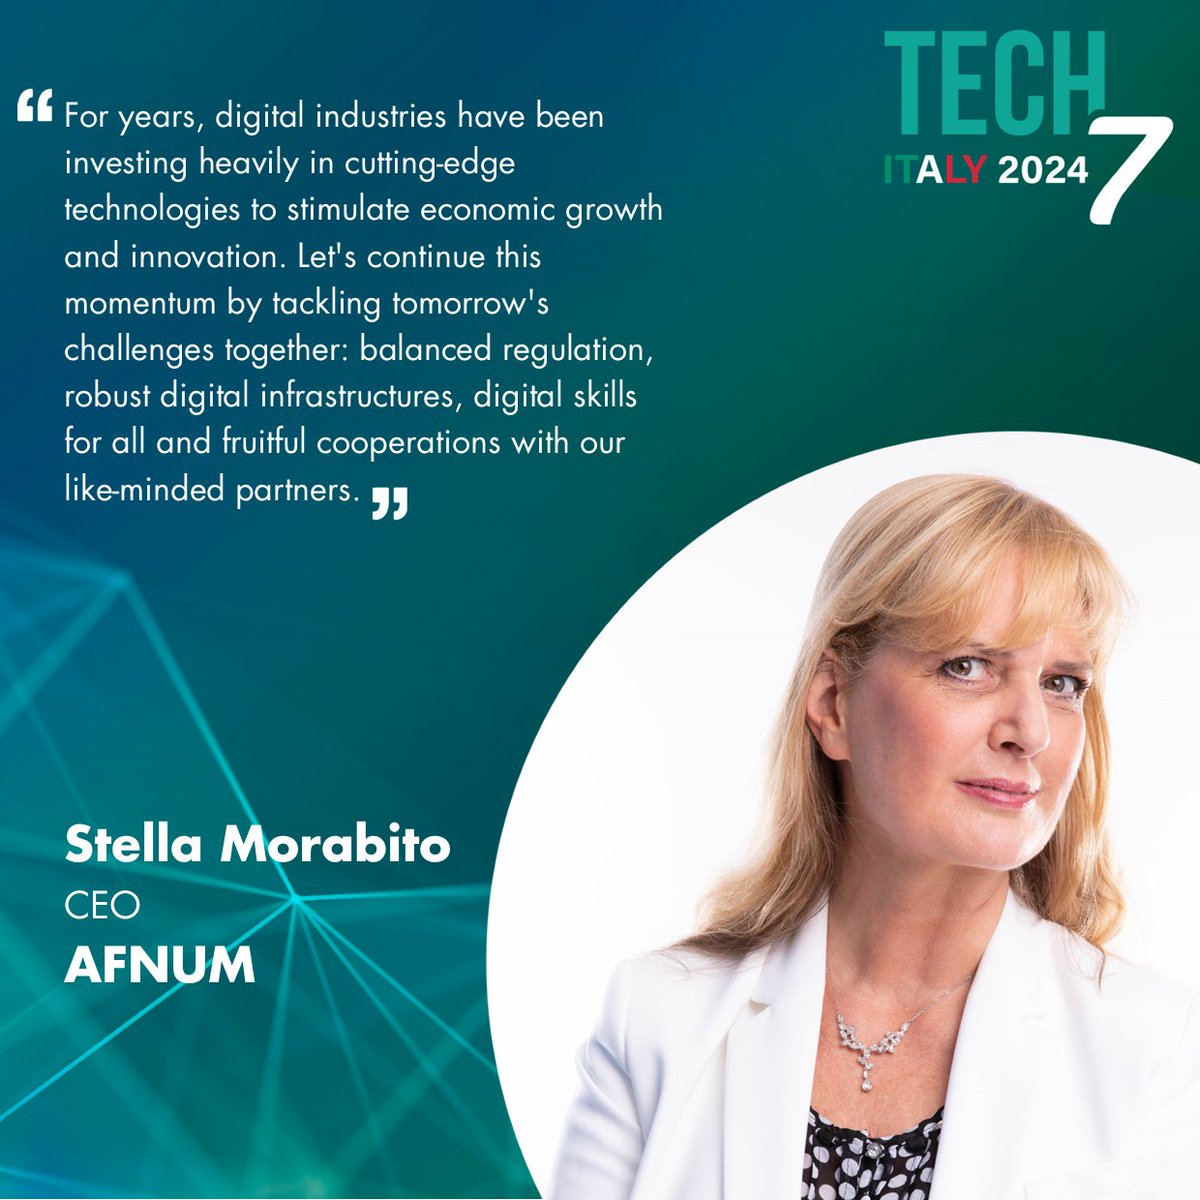 A the #Tech7 event, taking place today in Rome, @StellaMorabito9, CEO of @AFNUM_FRANCE, will talk about the impact of emerging technologies on economic growth and business transformation 👩‍💻💹 Live streaming 👉youtube.com/watch?v=f4I9ju…